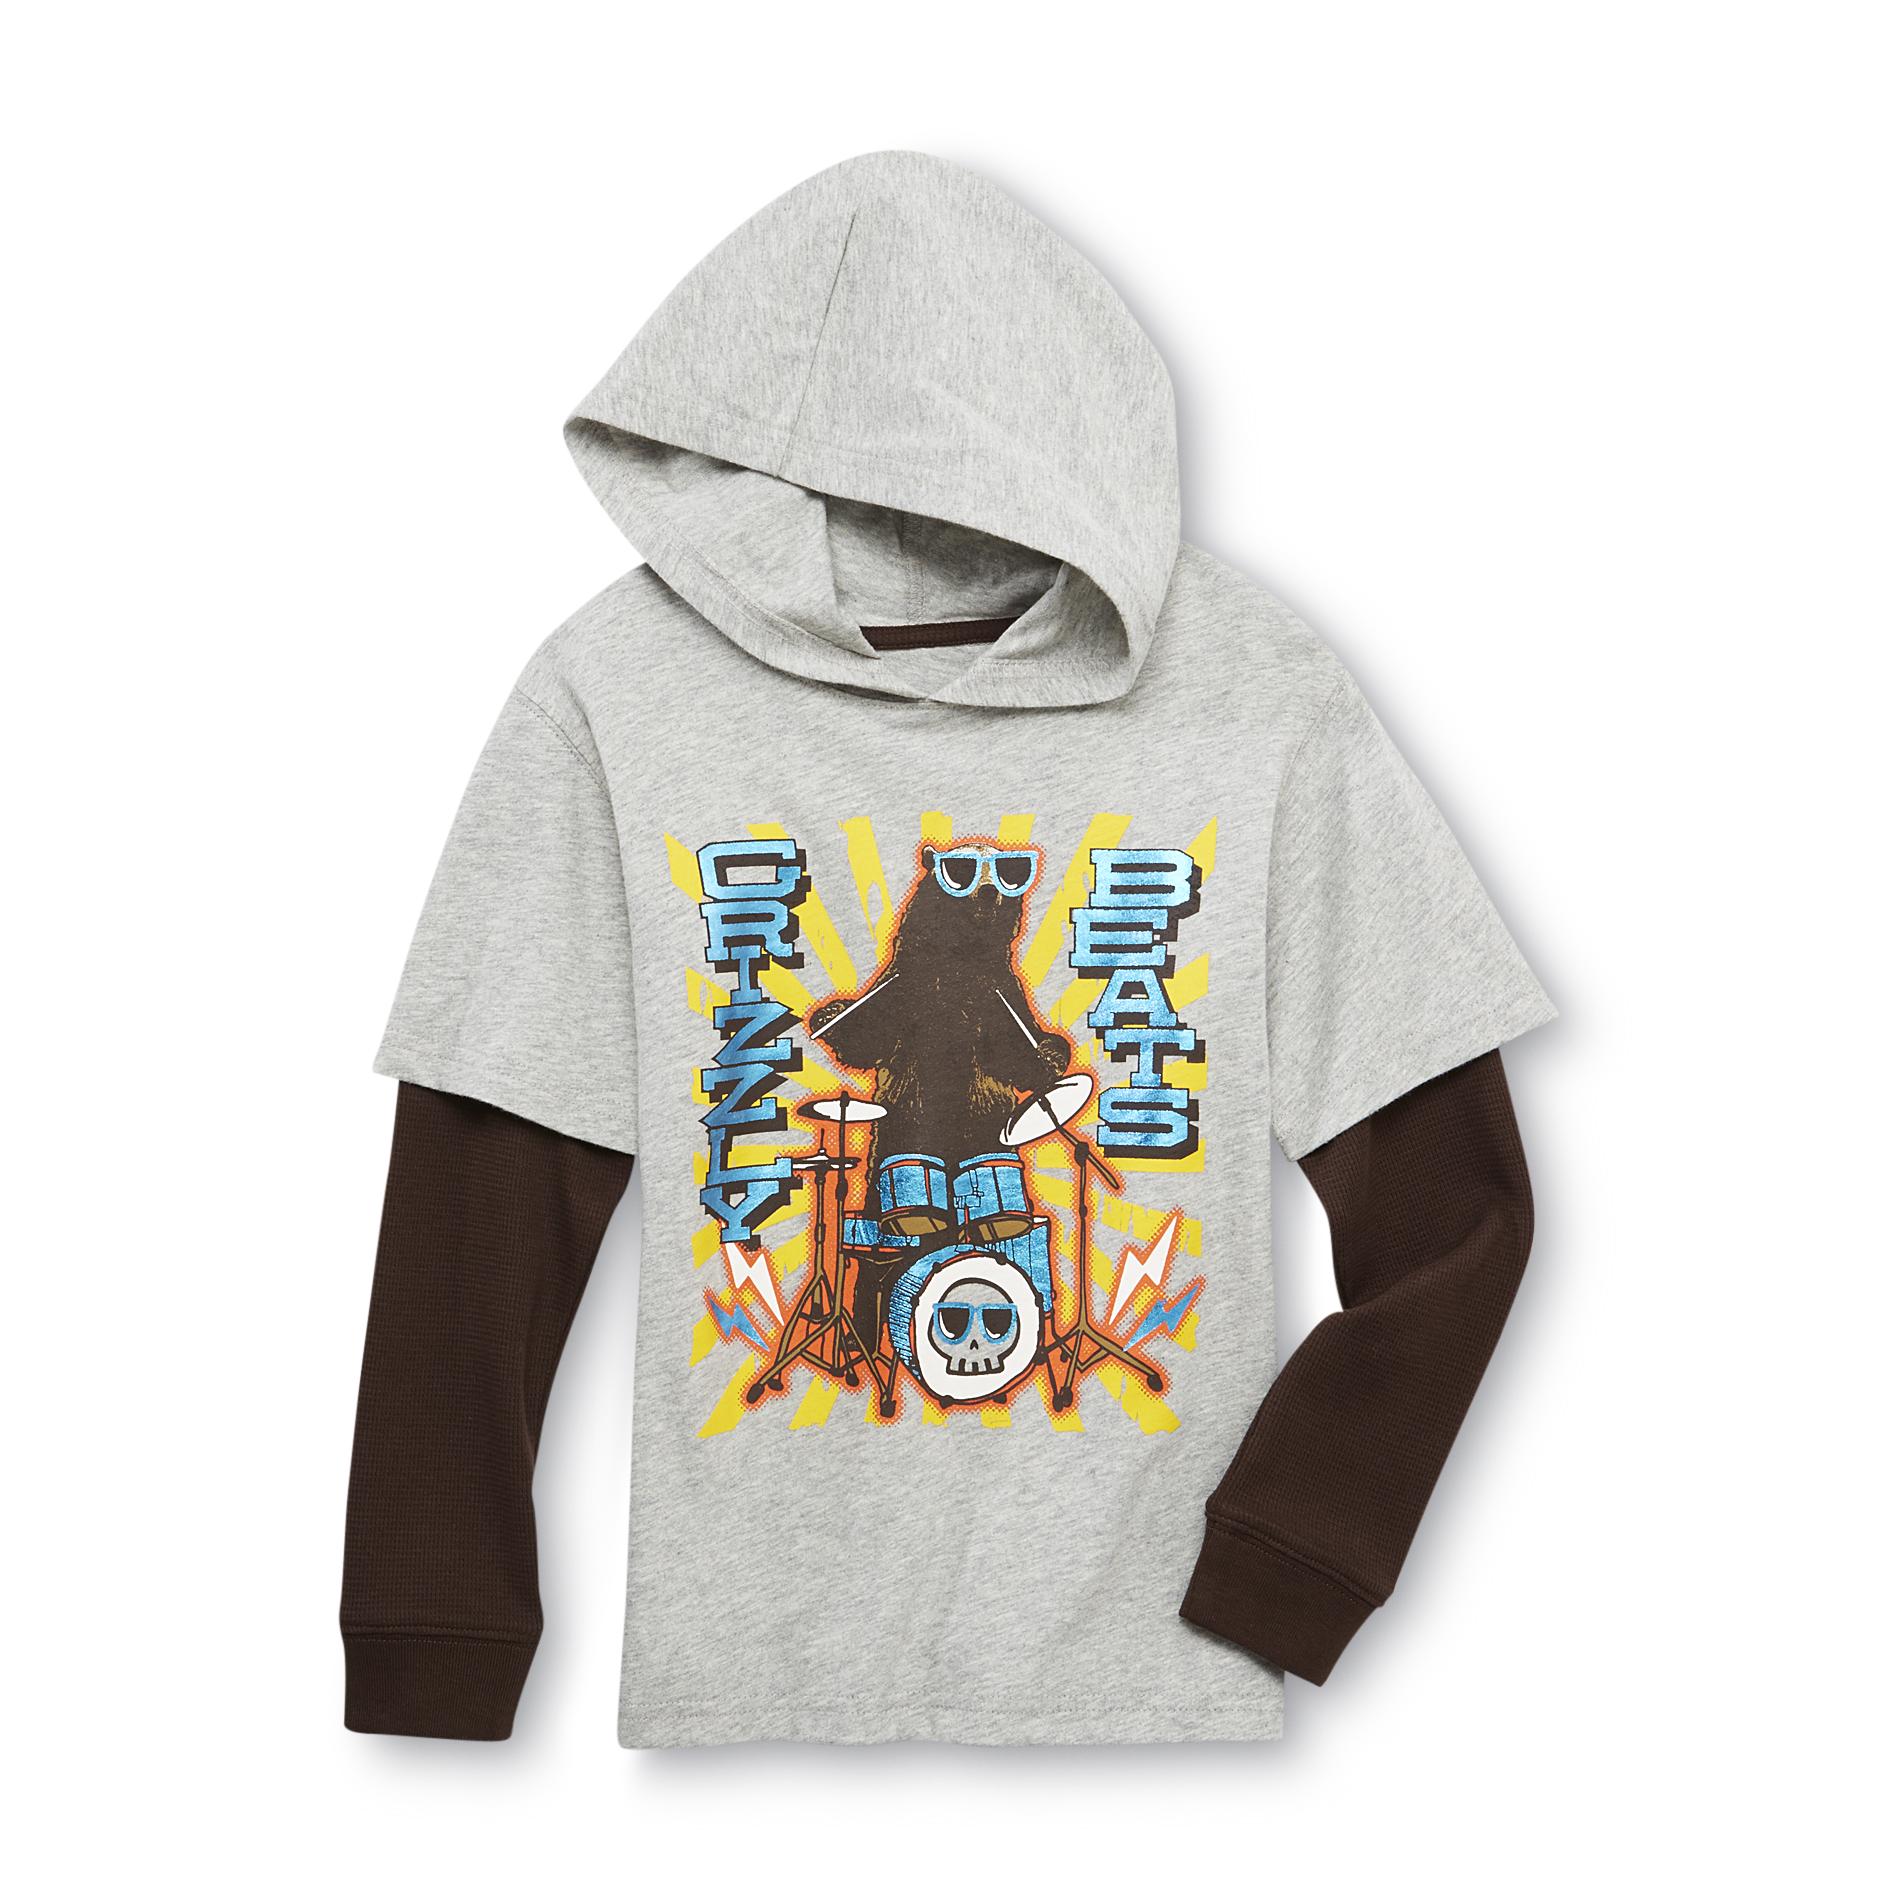 Toughskins Boy's Hooded Graphic T-Shirt - Grizzly Beats